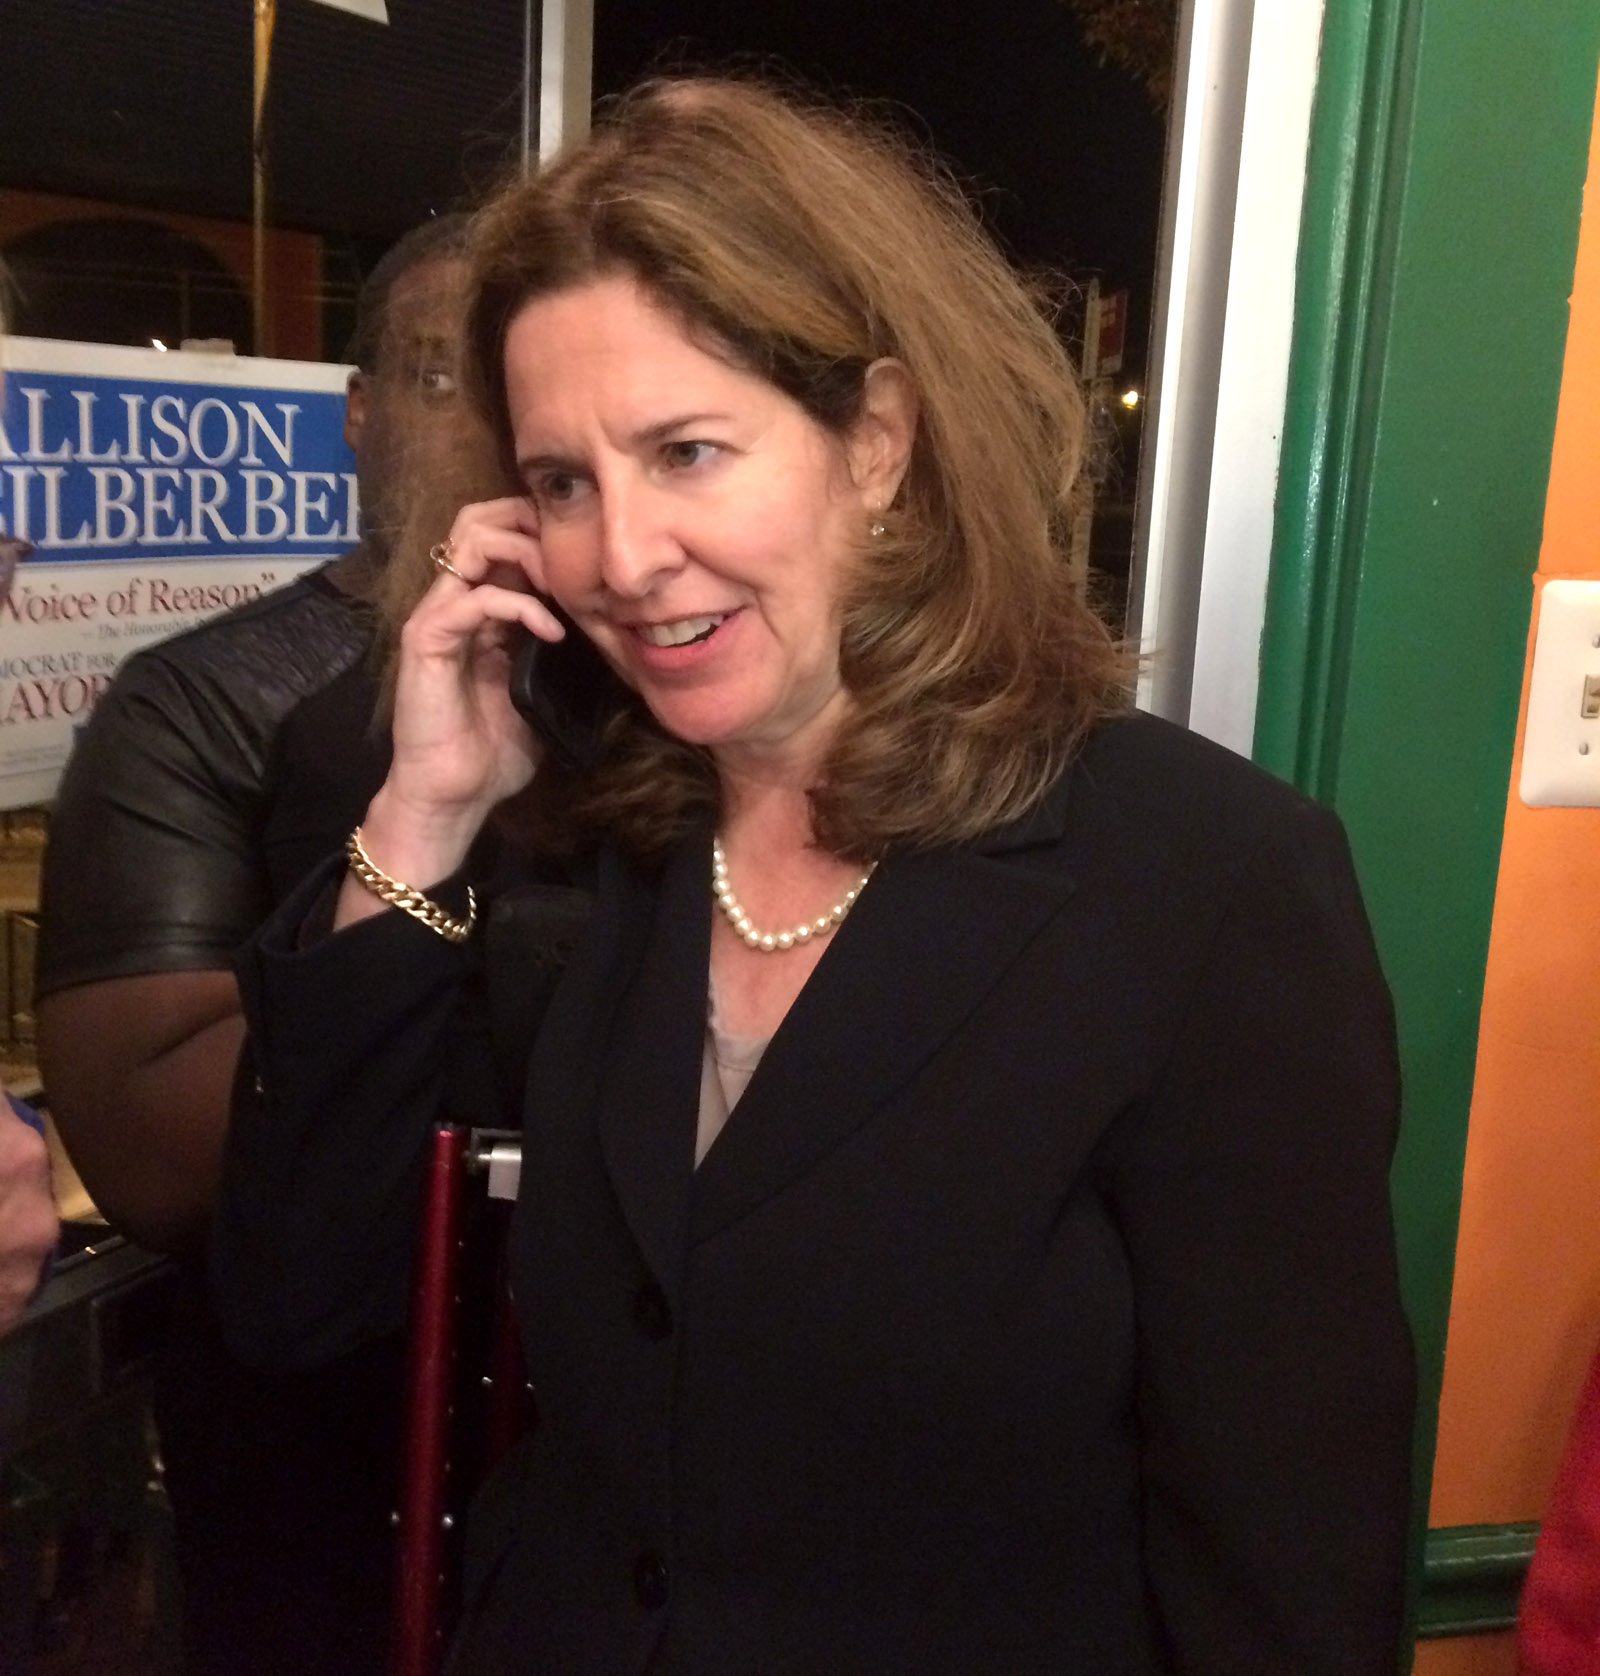 Alexandria Mayor-elect Allison Silberberg talks on the phone during her election night celebration in Del Ray on Tuesday, Nov. 3, 2015. (WTOP/Dick Uliano)